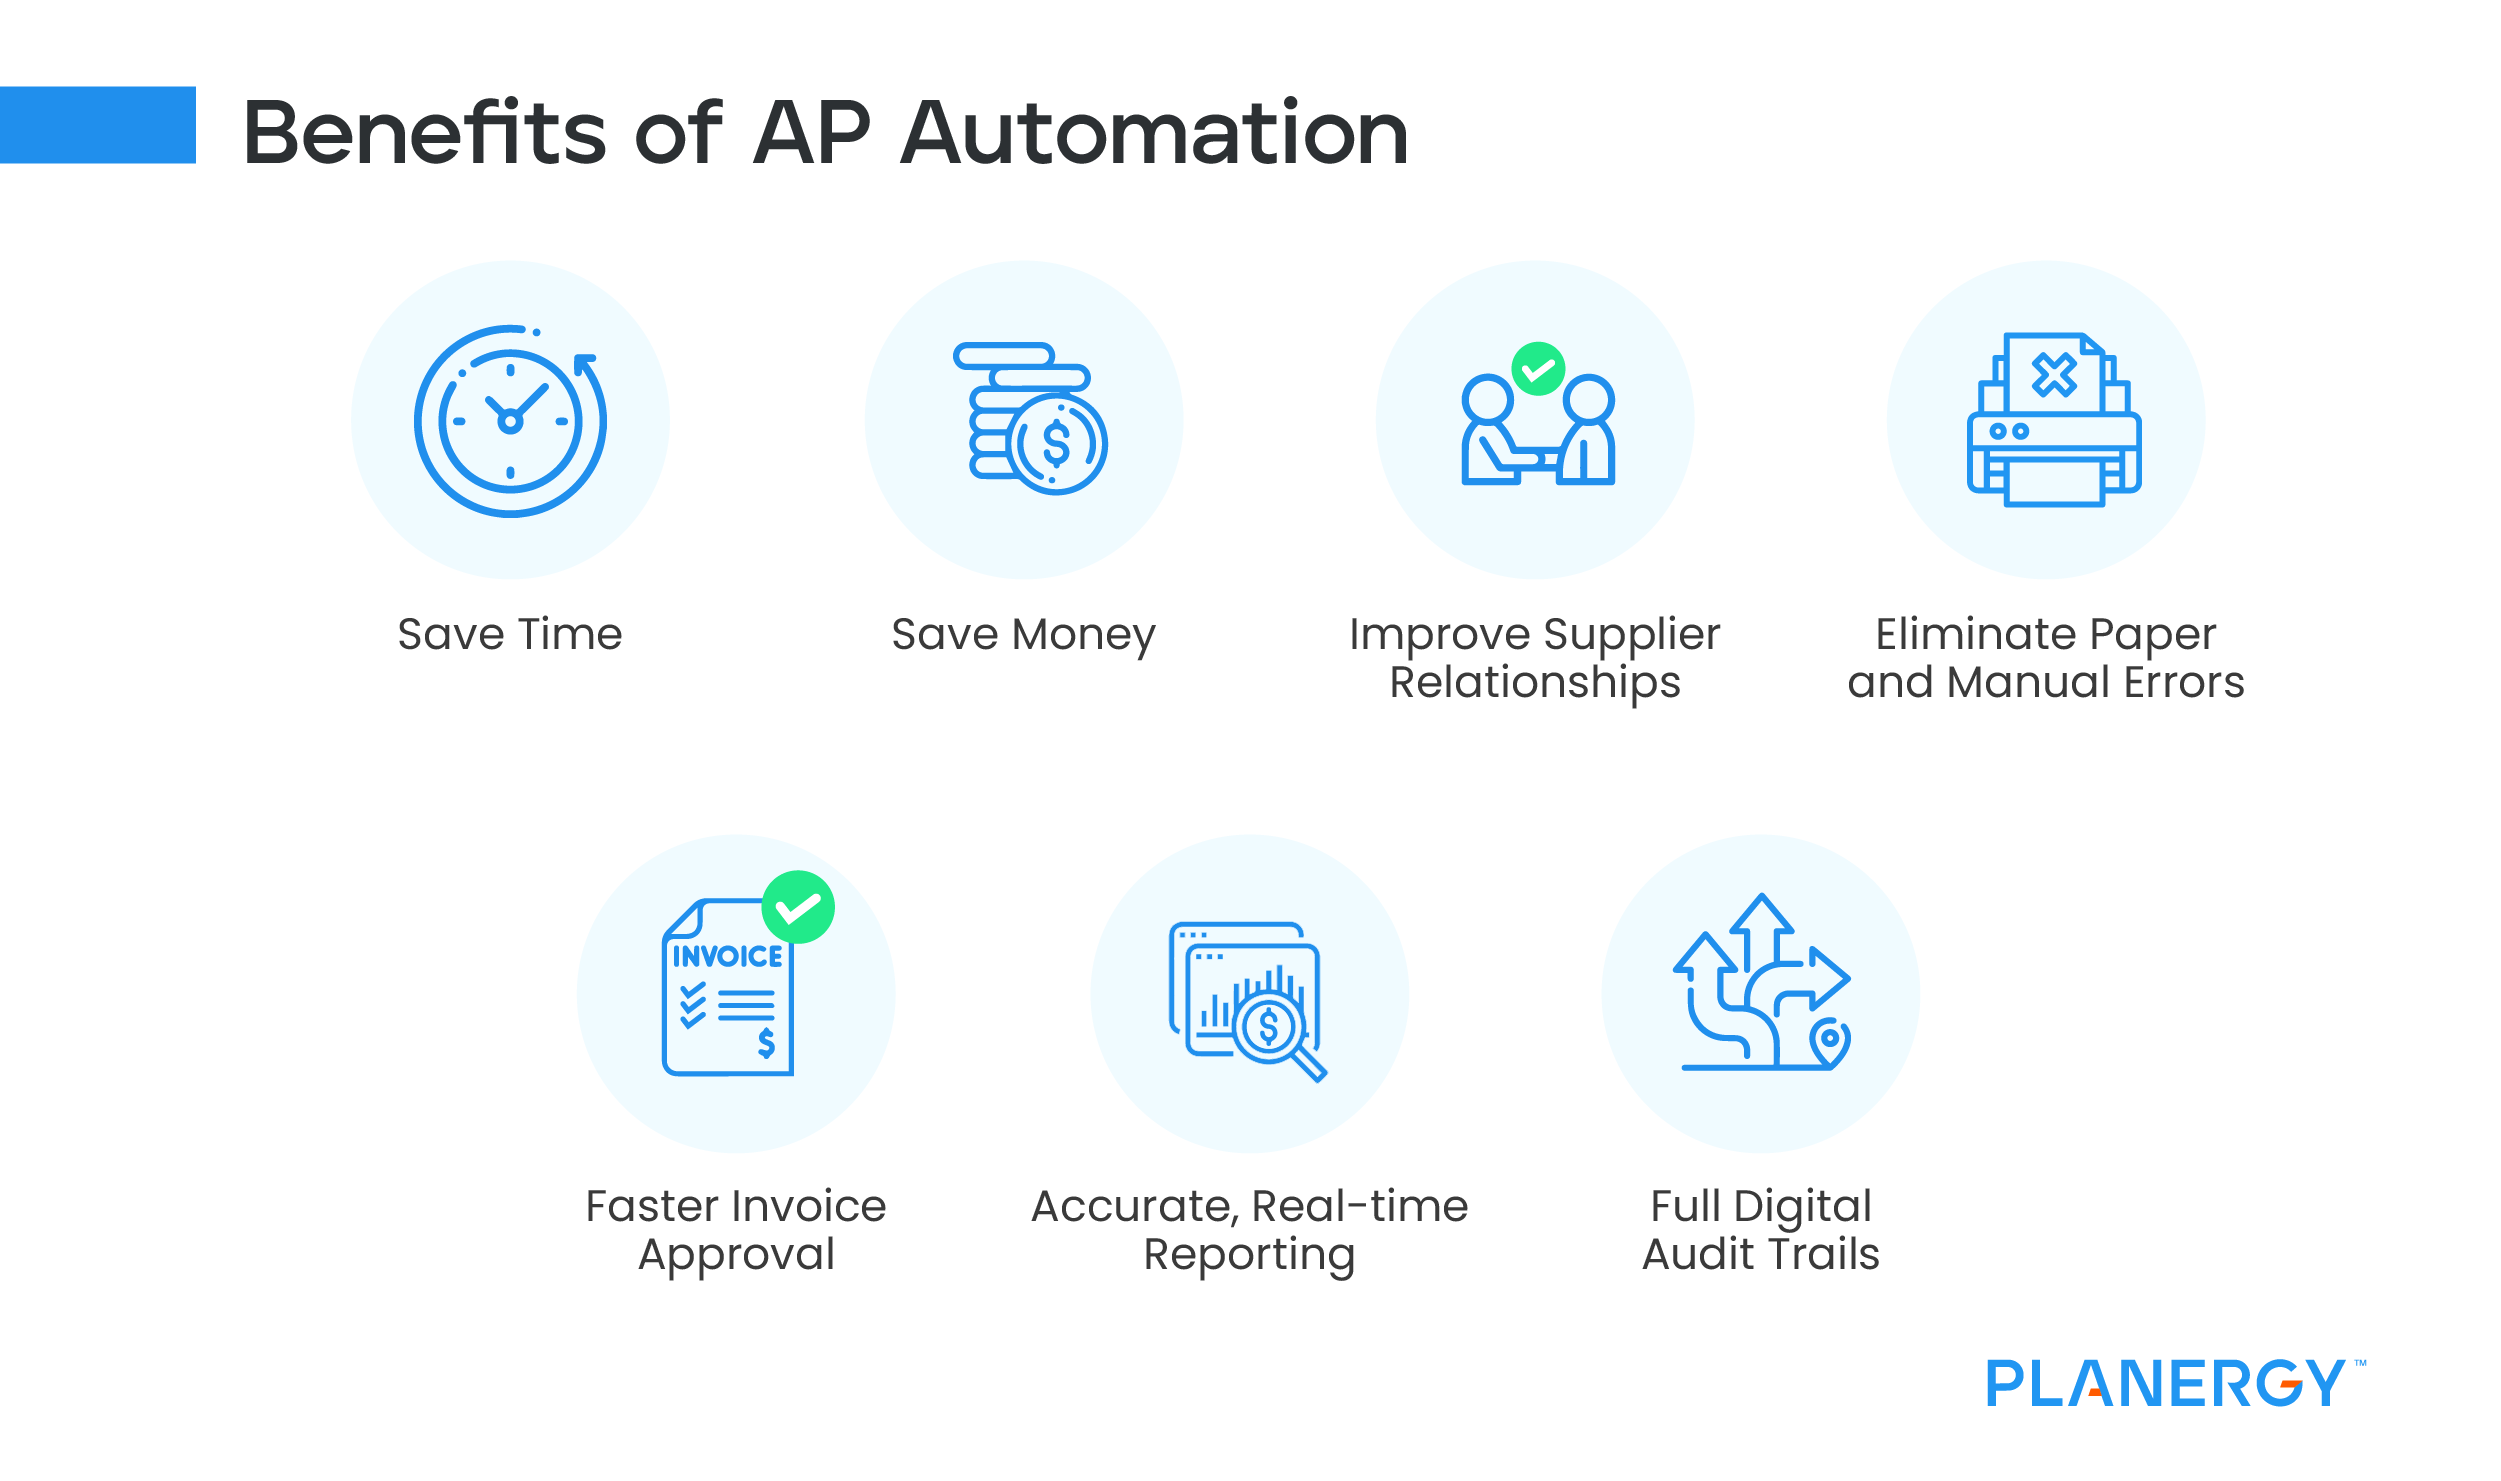 Benefits of AP Automation